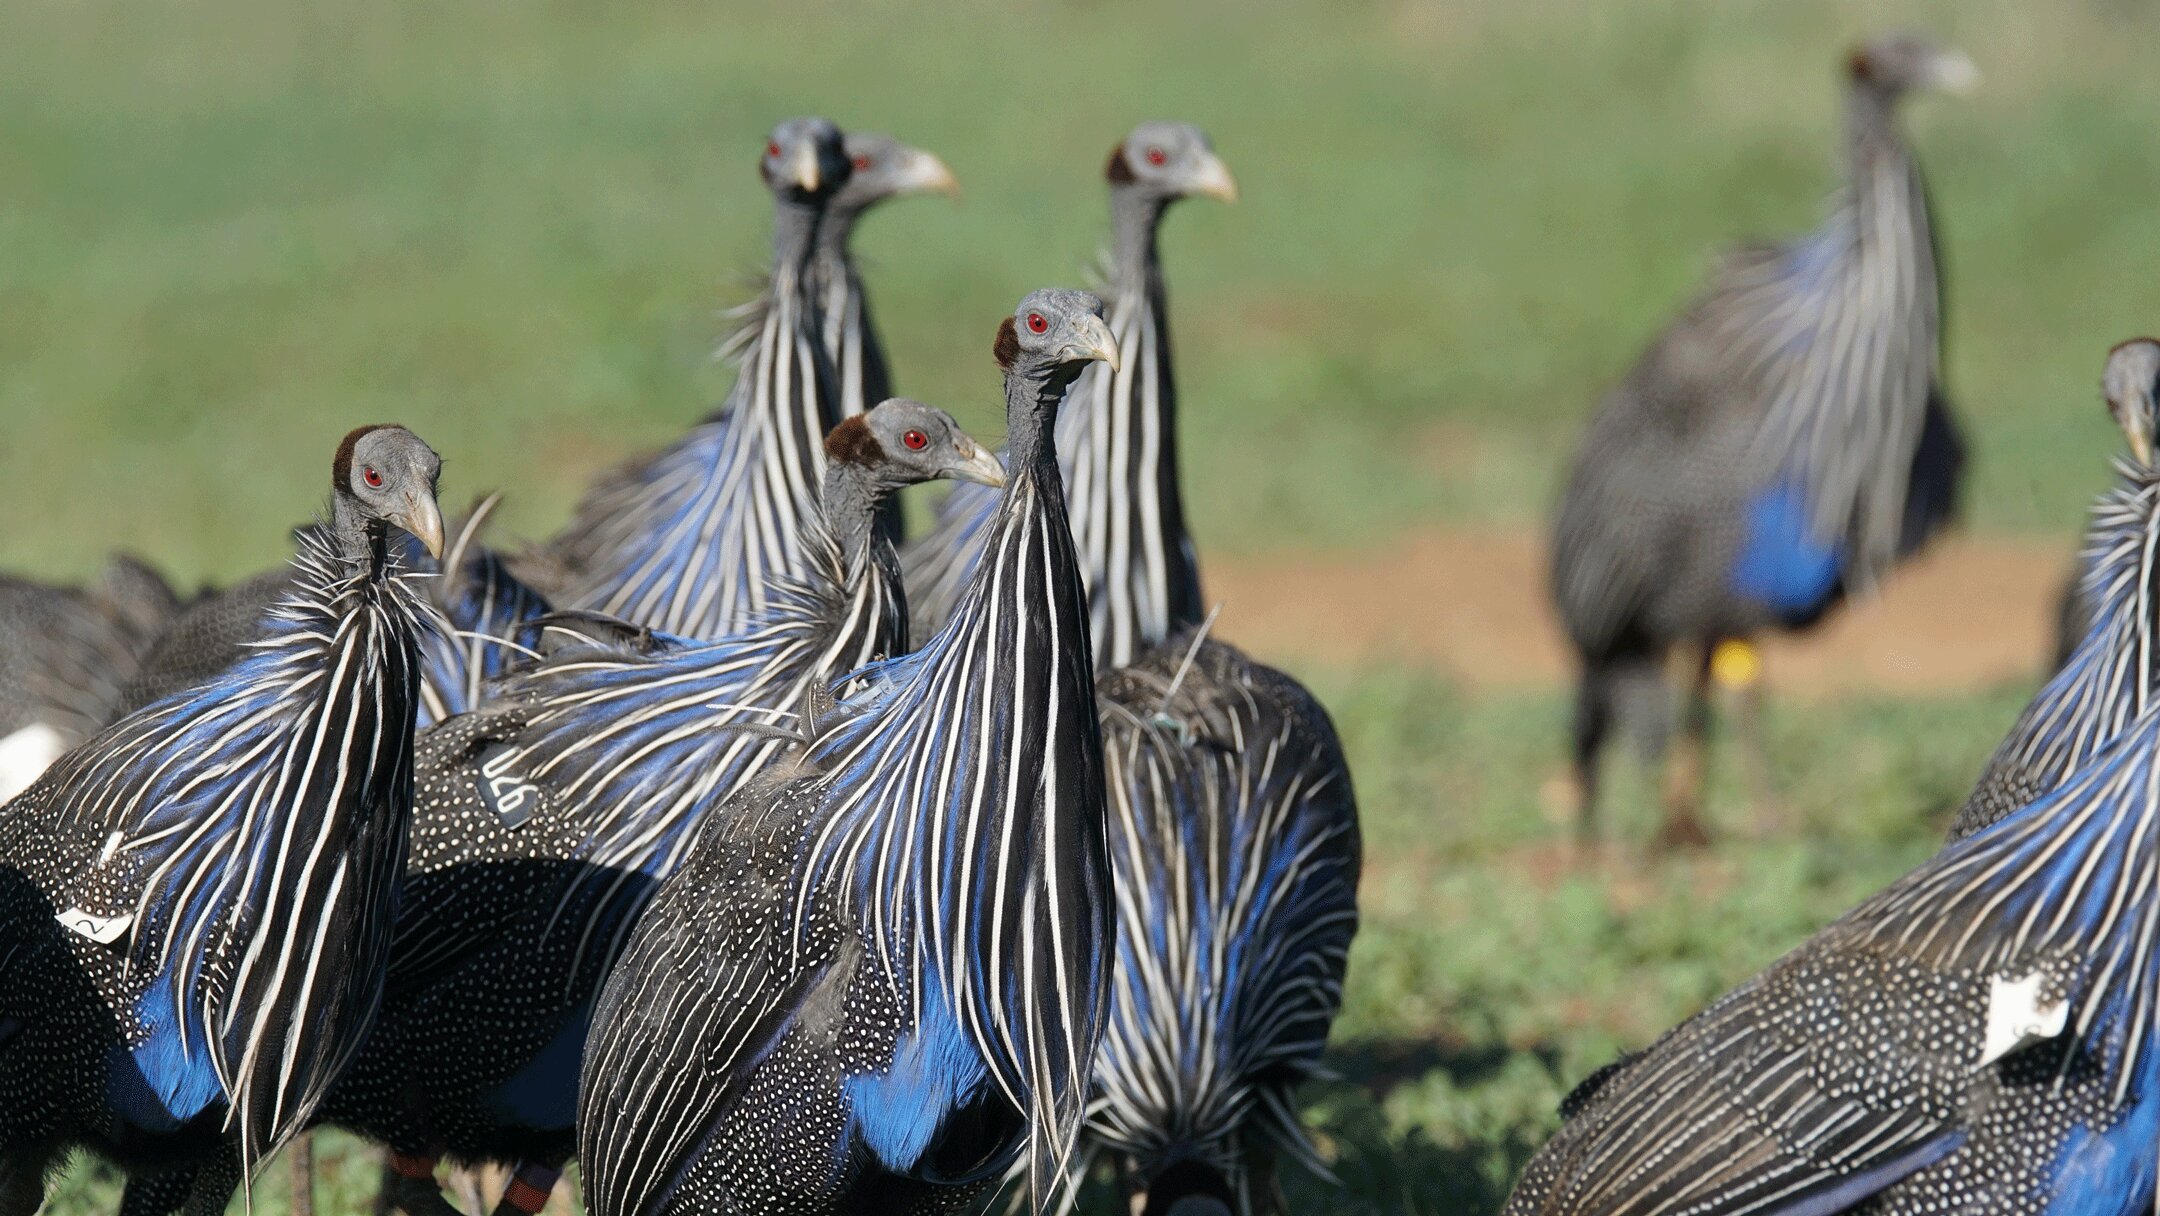 Complex society discovered in the vulturine guineafowl